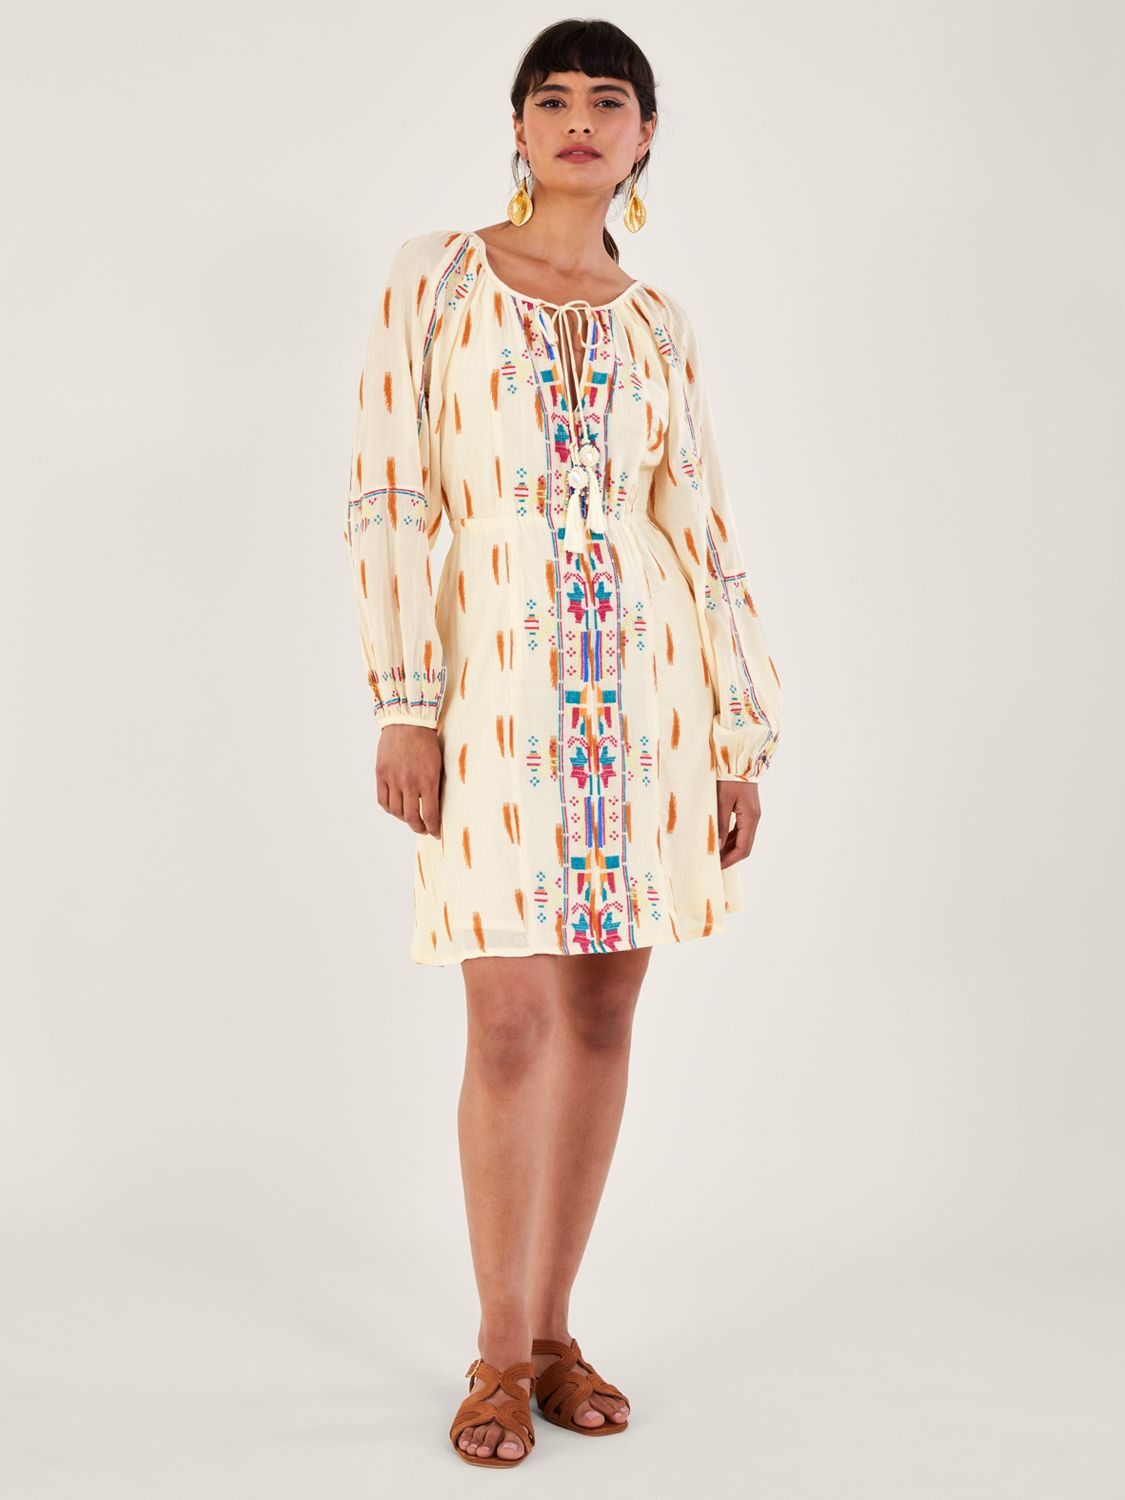 Monsoon Aztec Embroidered Cotton Dress, Ivory, XL